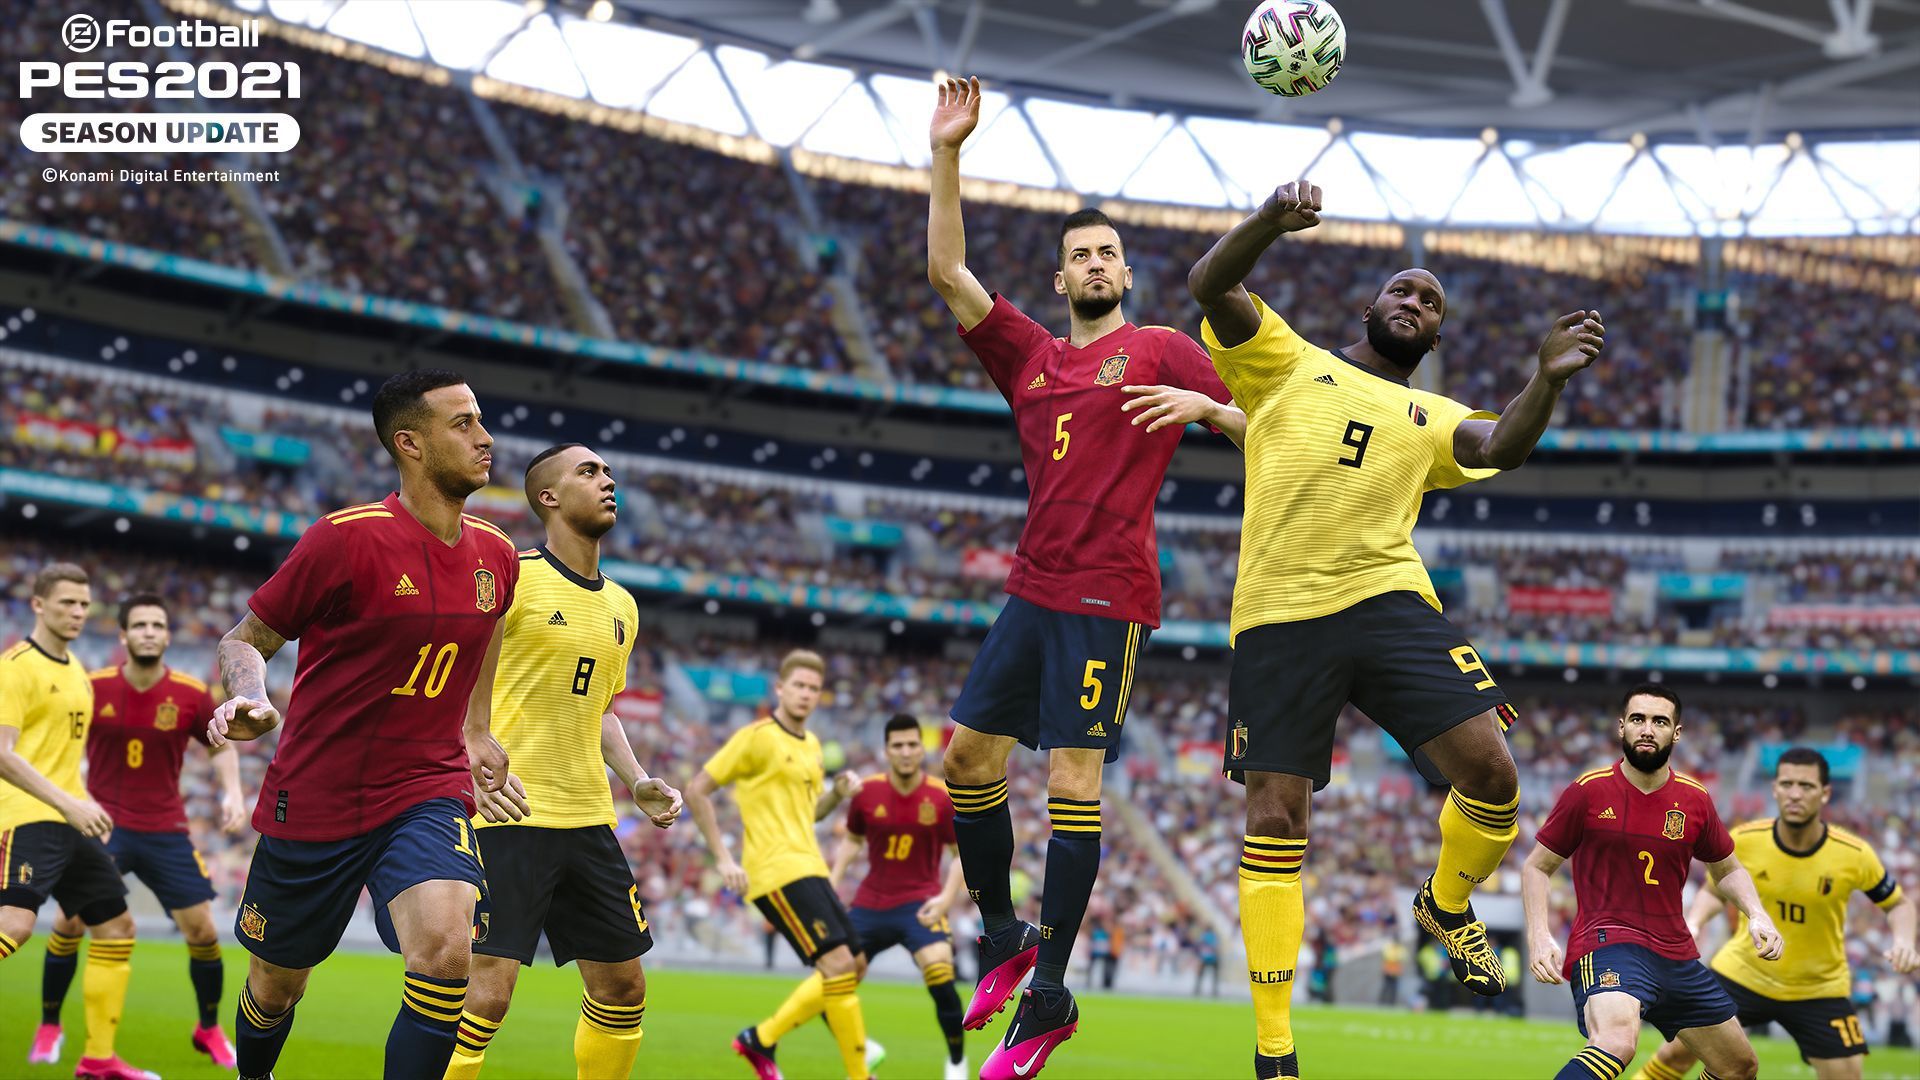 PES 2021 will not arrive on Nintendo Switch: the official confirmation